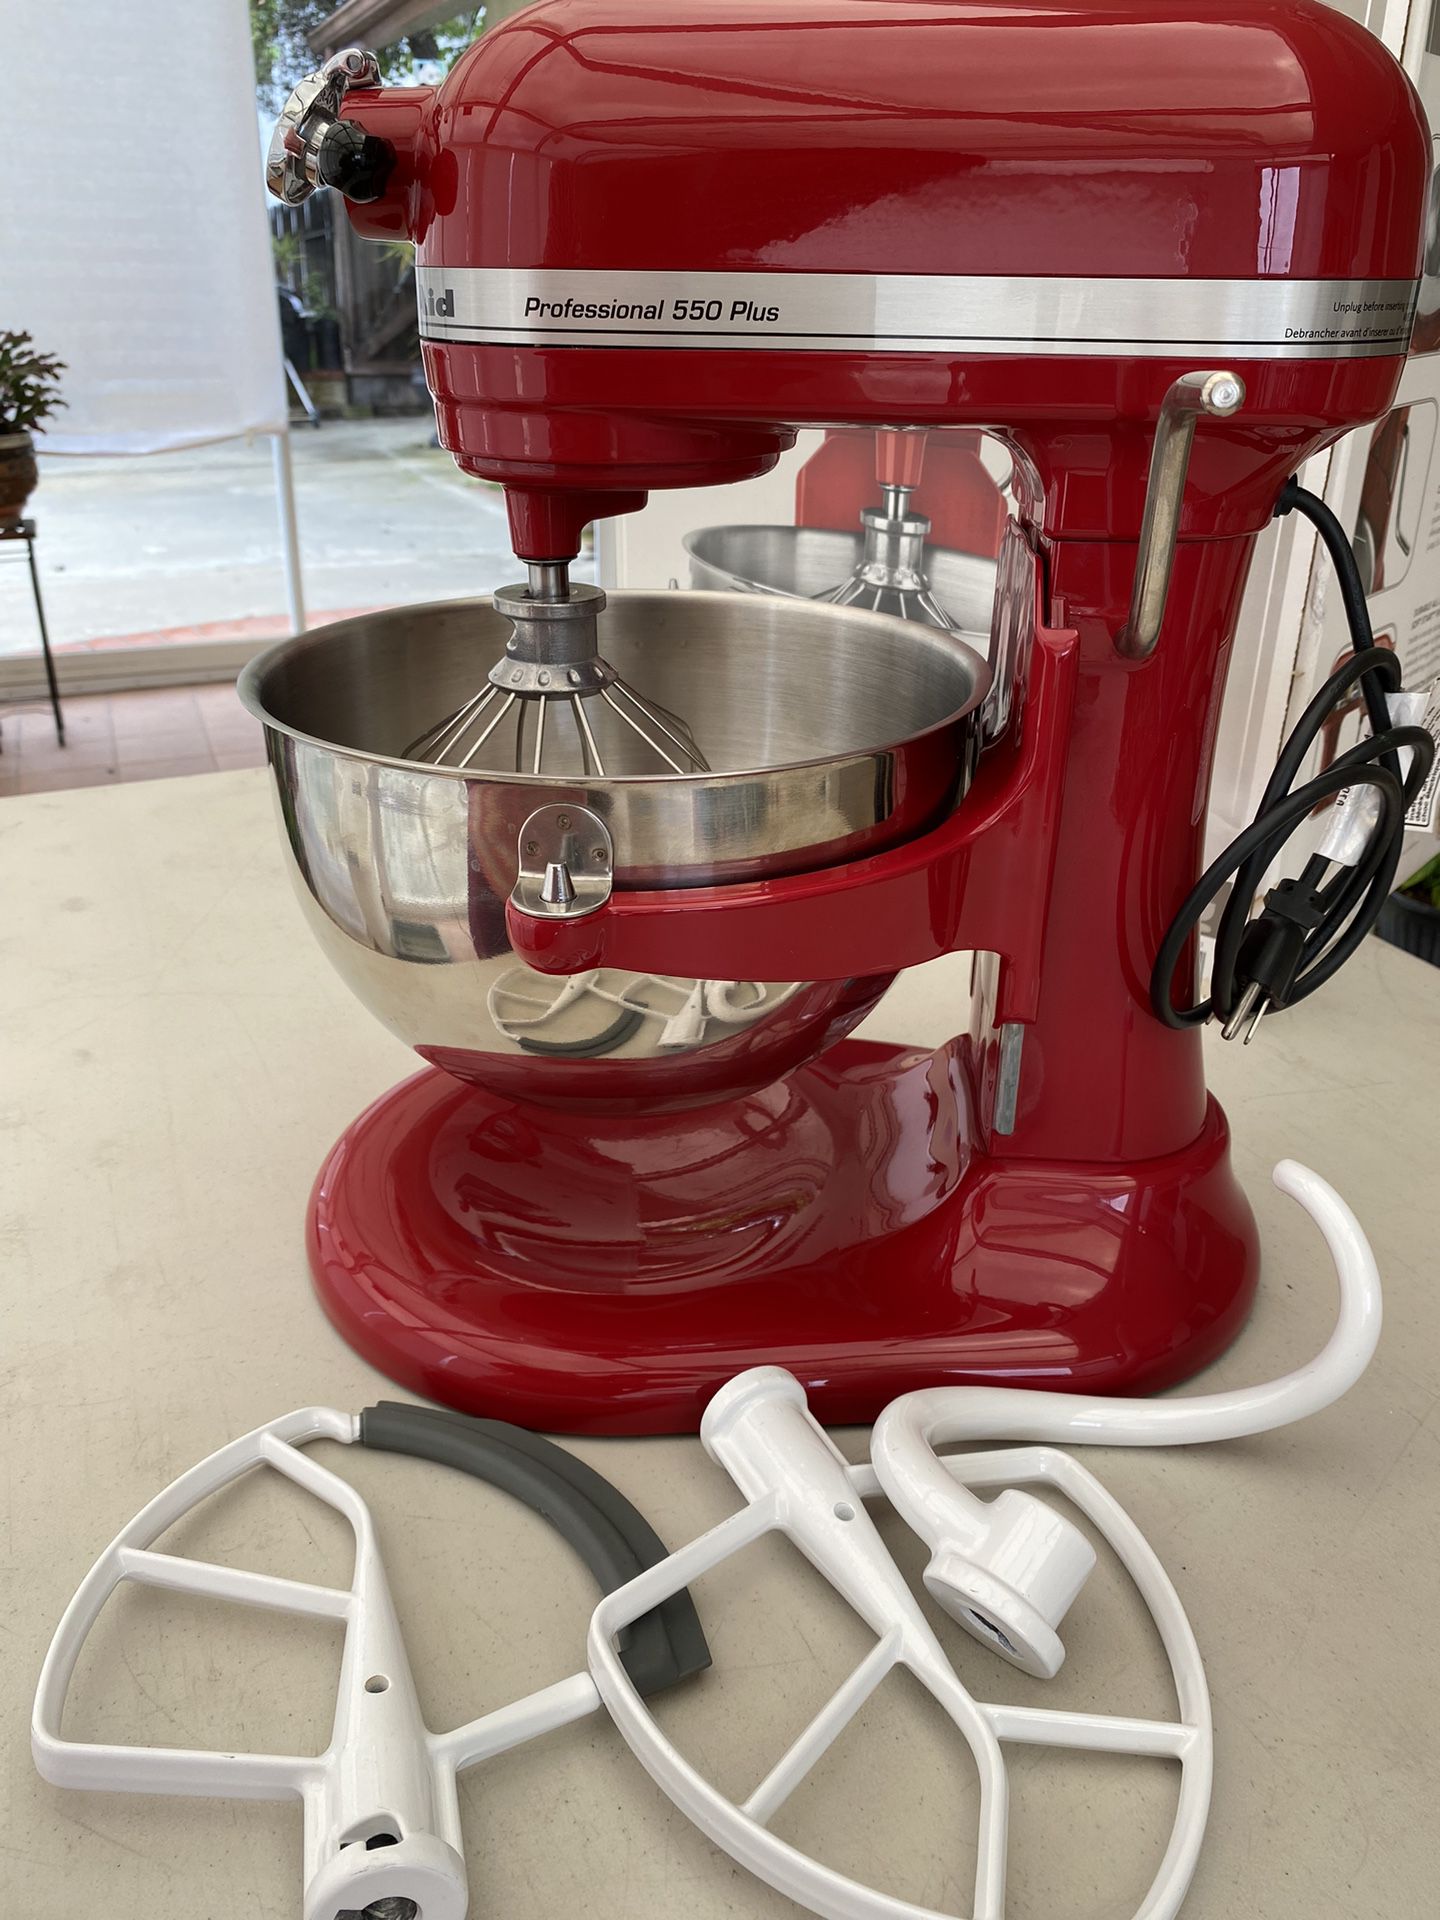 KitchenAid Stand Mixers for Sale in San Dimas, CA - OfferUp